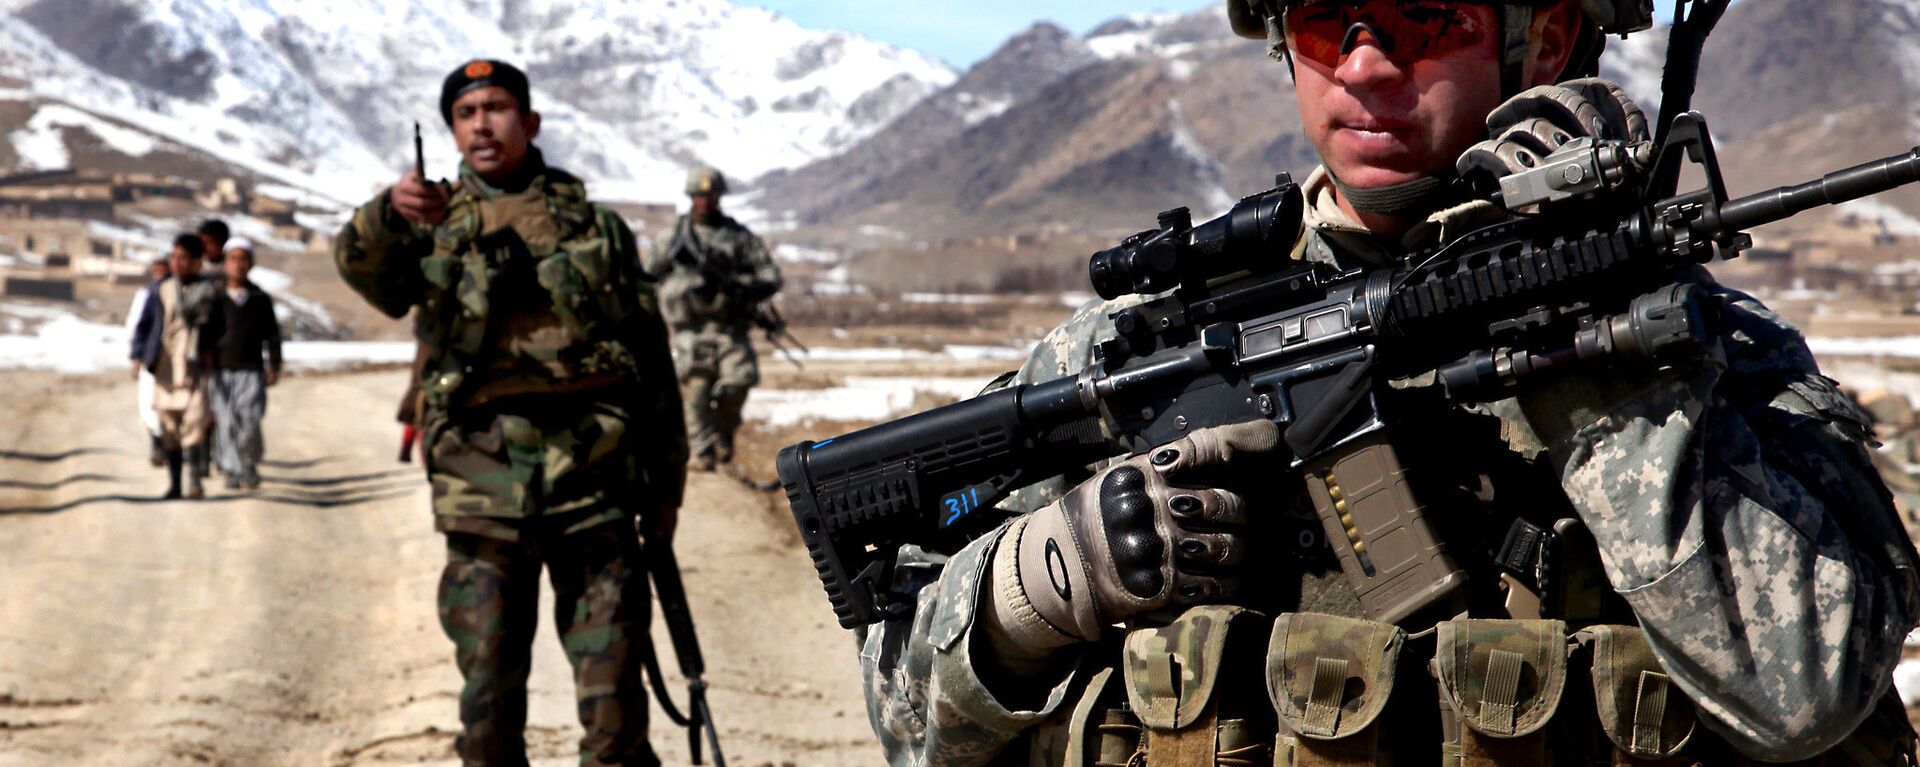 A U.S. Army Soldier patrols with Afghan soldiers to check on conditions in the village of Yawez in Wardak province, Afghanistan, Feb. 17, 2010 - Sputnik International, 1920, 14.05.2021